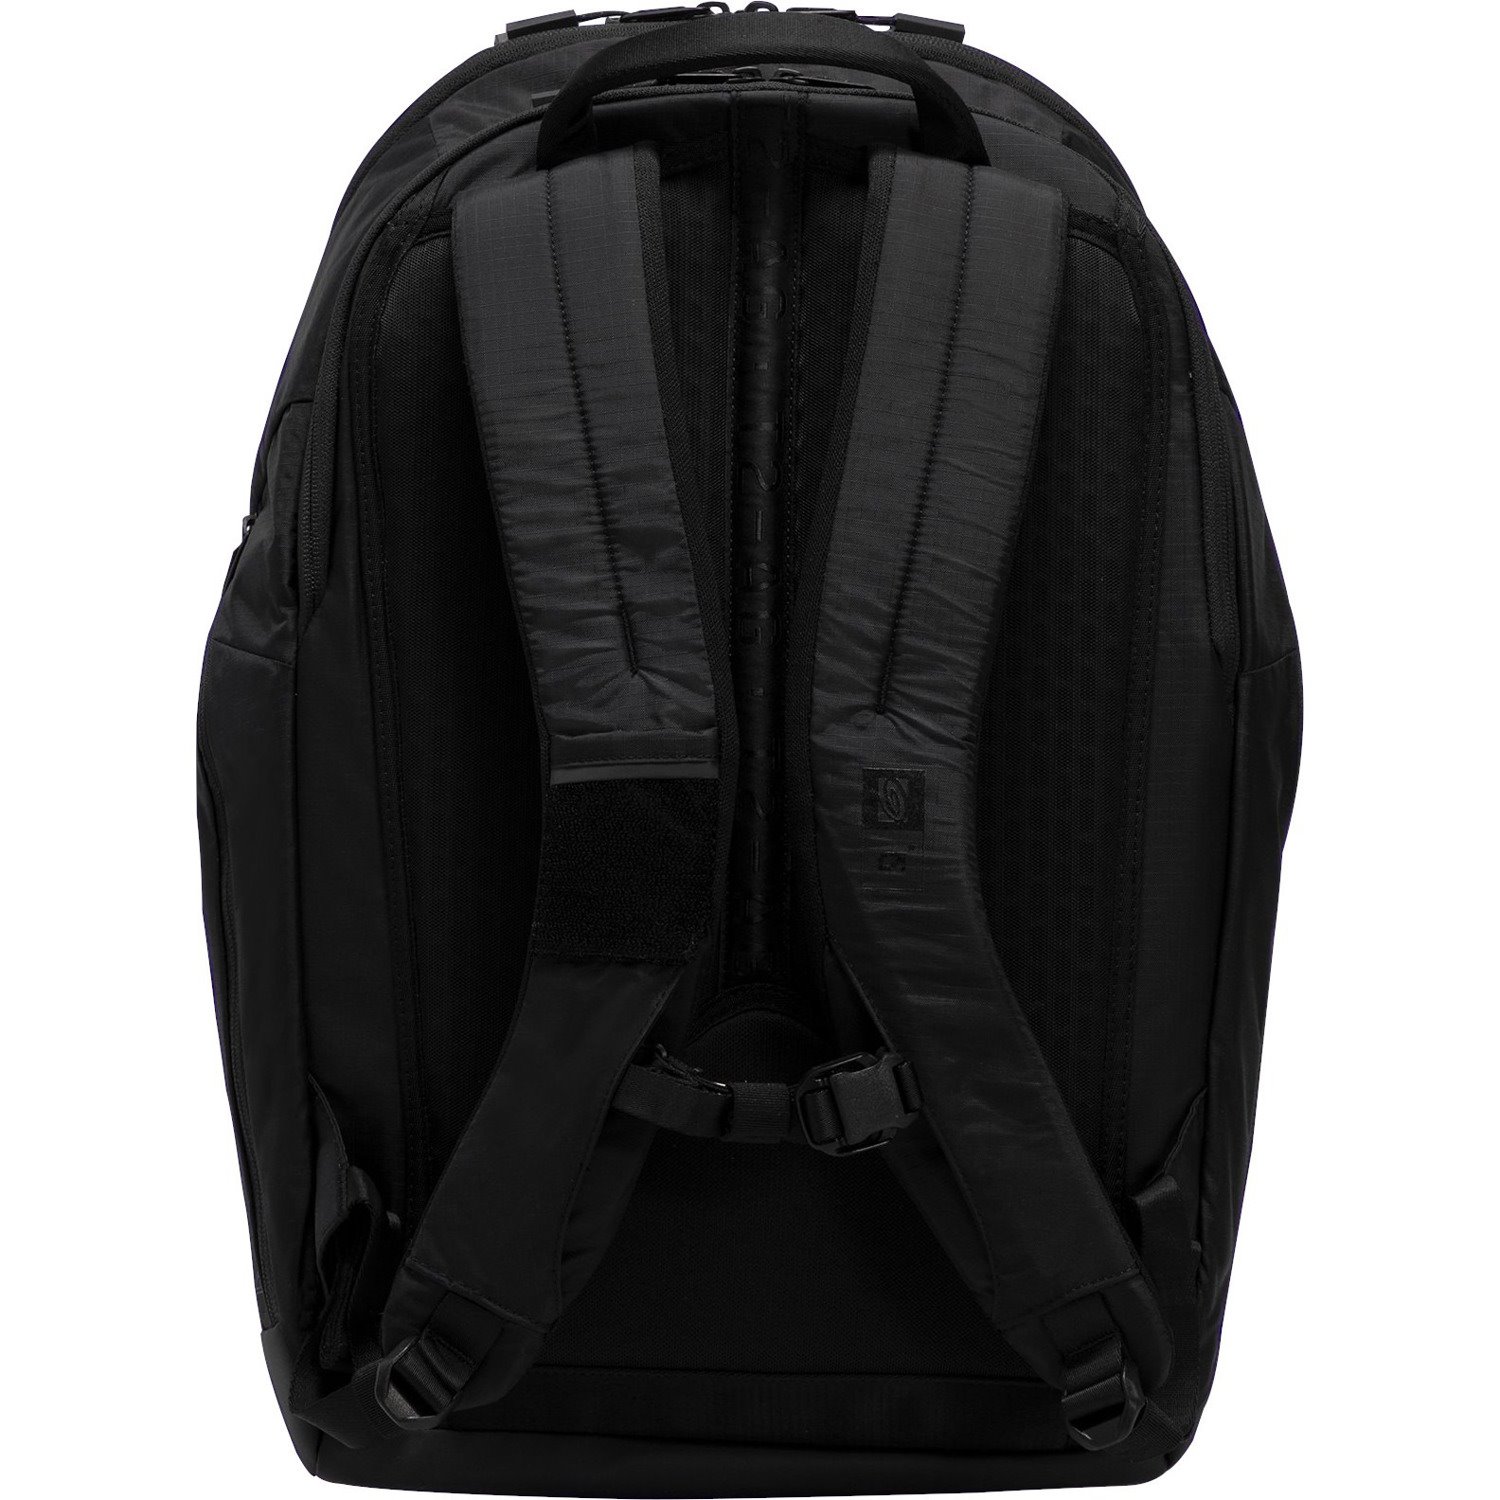 Timbuk2 Carrying Case (Backpack) for 16" Notebook